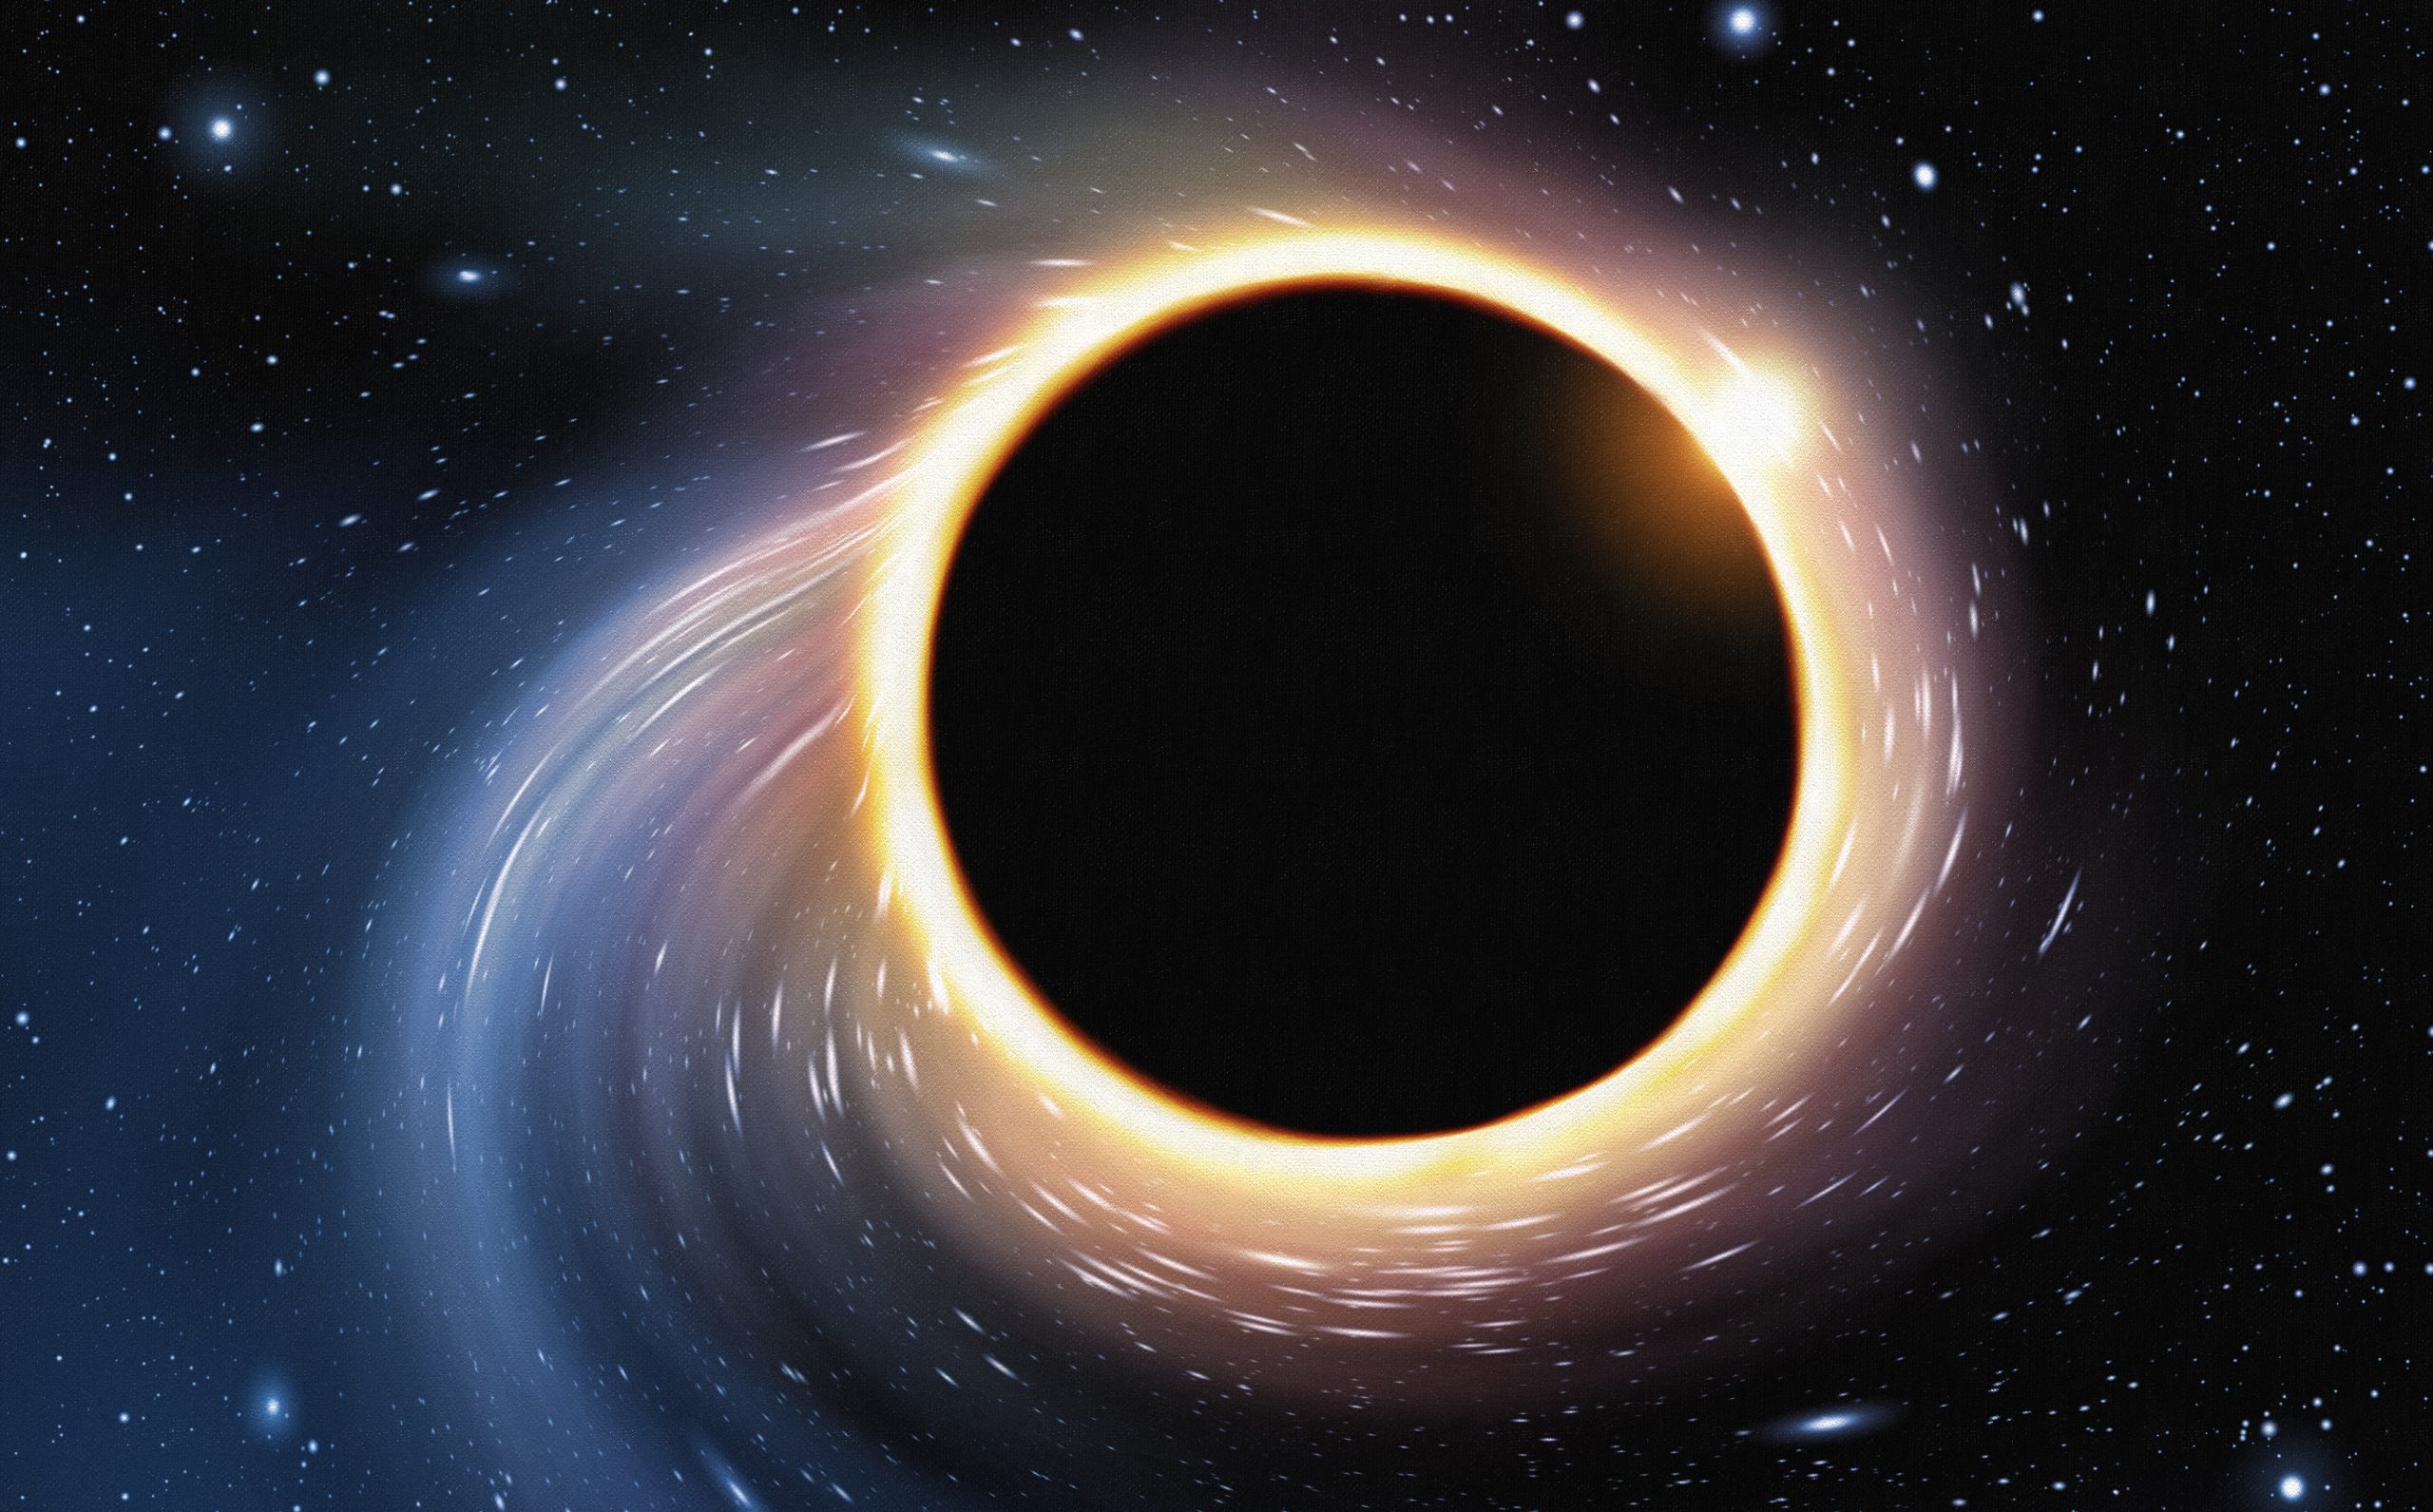 Artistic rendering of a Black Hole. Depositphotos.